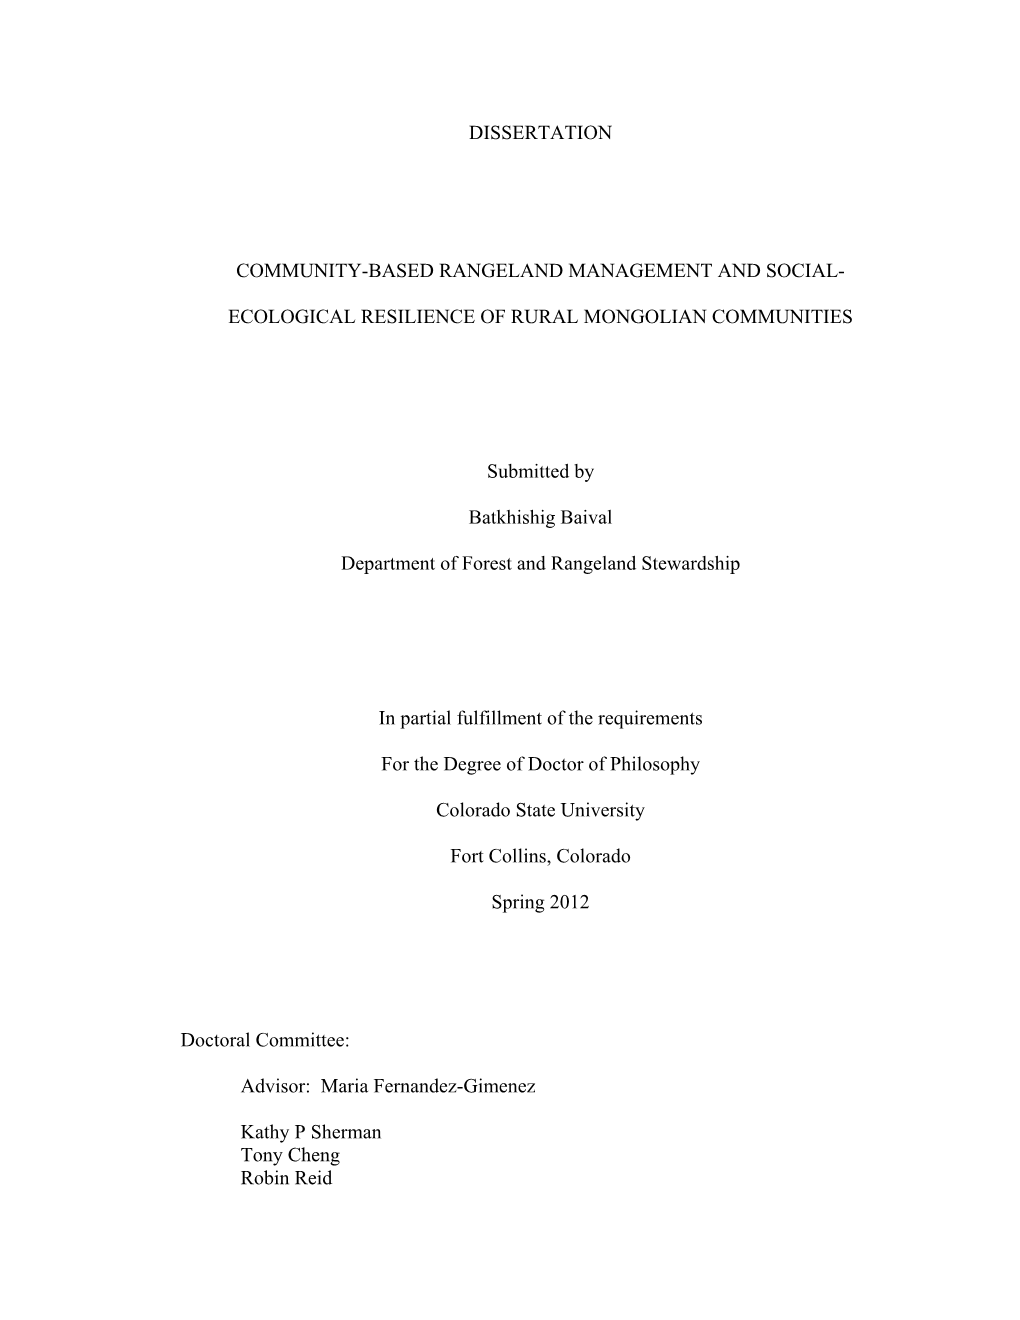 DISSERTATION COMMUNITY-BASED RANGELAND MANAGEMENT and SOCIAL- ECOLOGICAL RESILIENCE of RURAL MONGOLIAN COMMUNITIES Submitted By